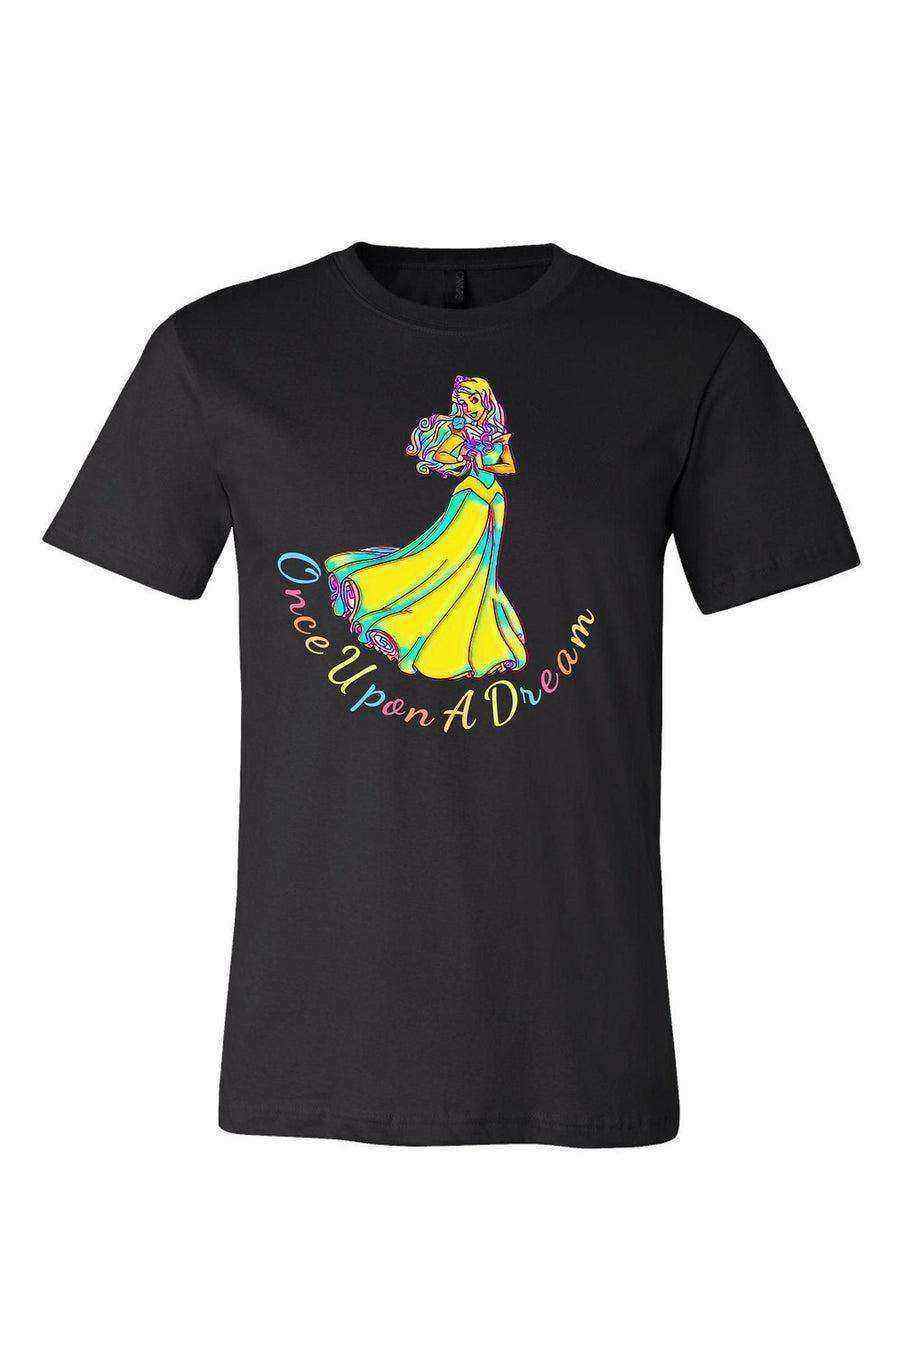 Youth | Sleeping Beauty Once Upon A Dream Shirt | Princess Aurora - Dylan's Tees